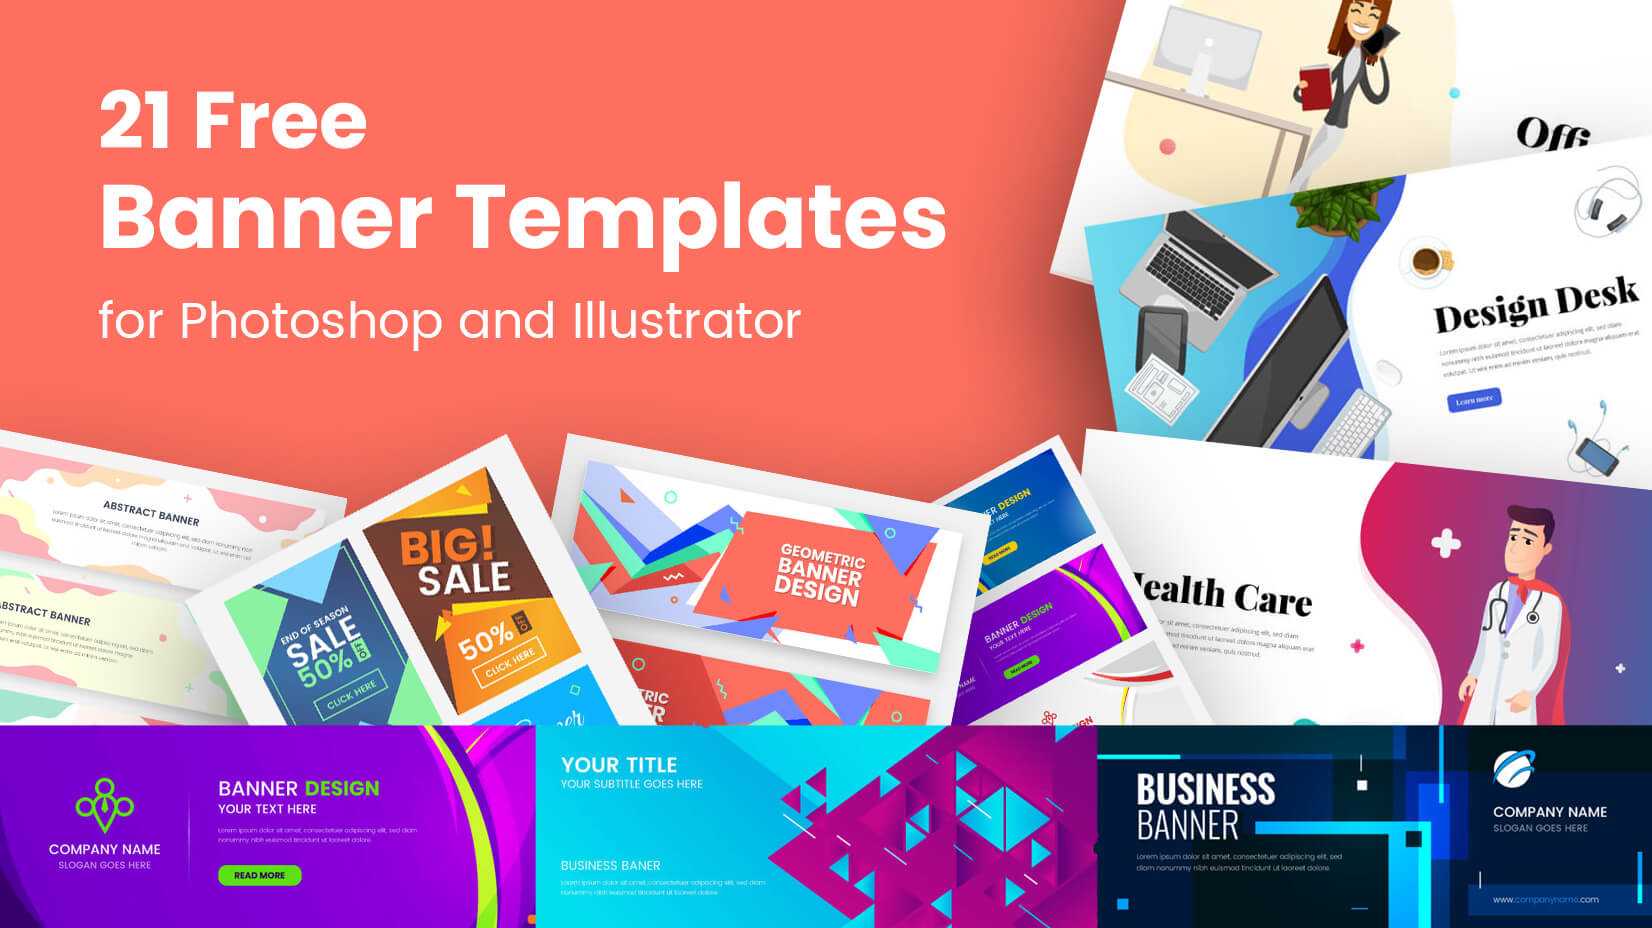 21 Free Banner Templates For Photoshop And Illustrator Throughout Banner Template For Photoshop